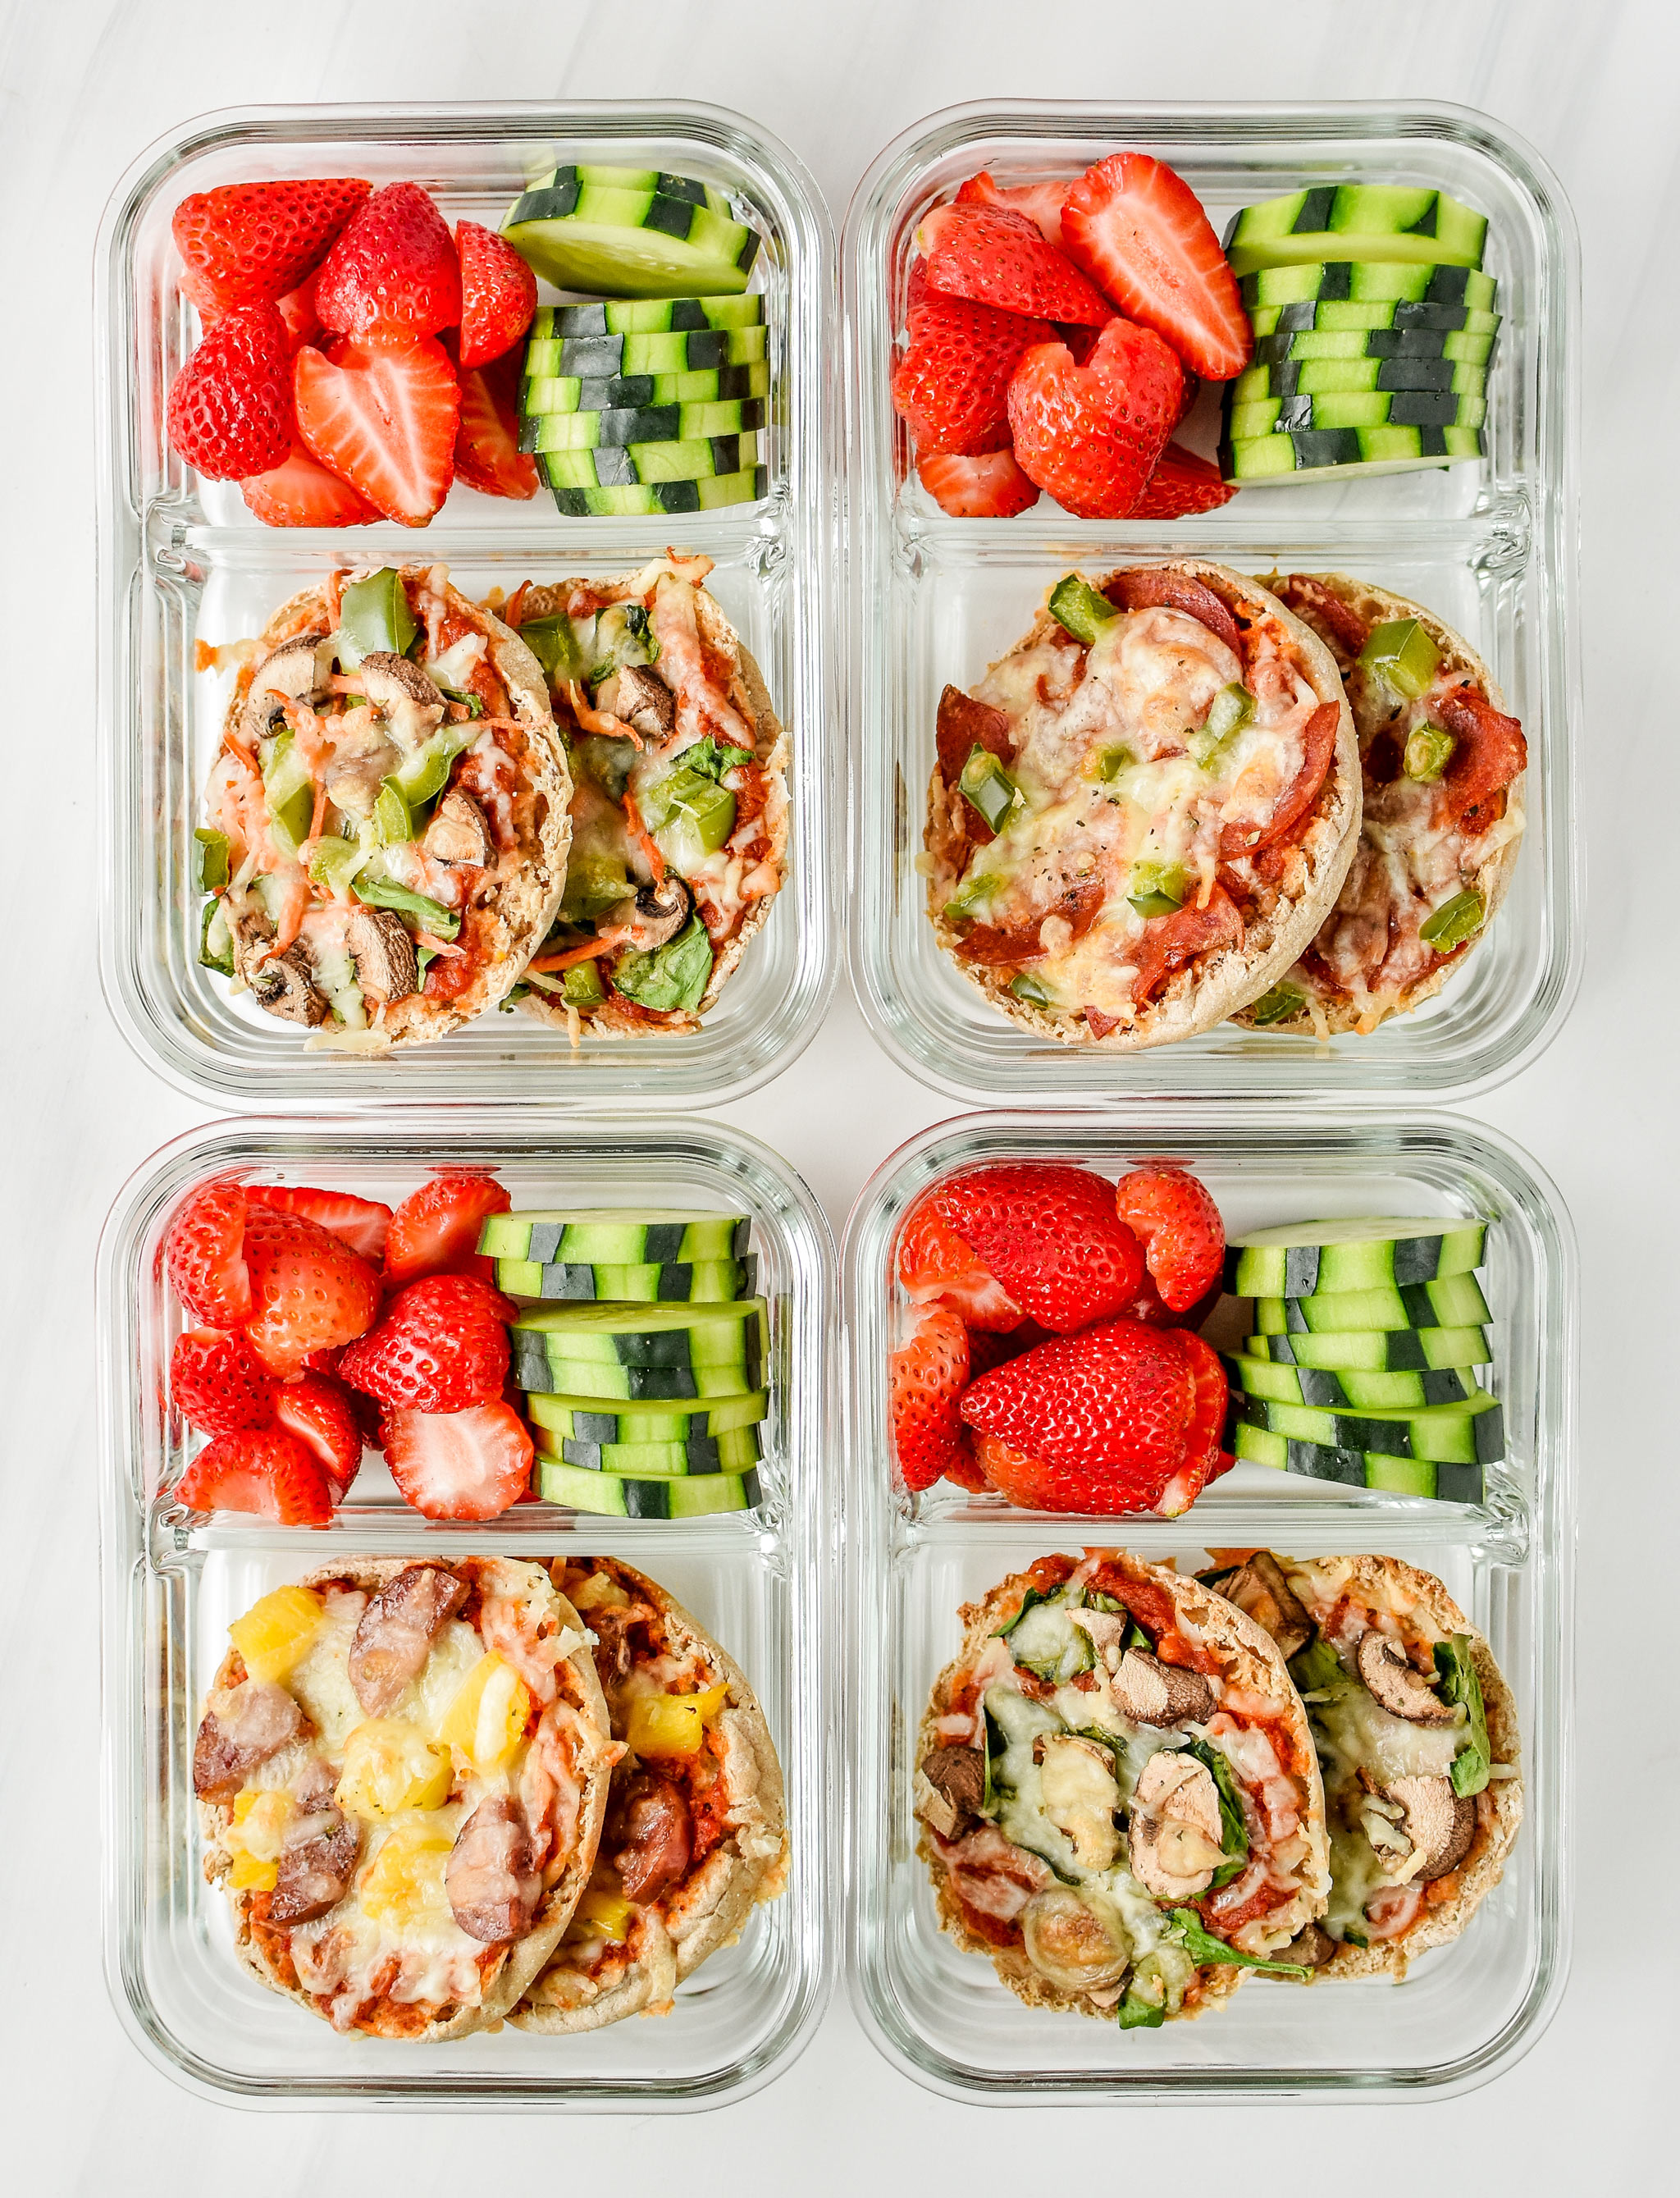 English muffin mini pizzas meal prep pictured from above in meal prep containers with fresh cut strawberries and cucumbers.